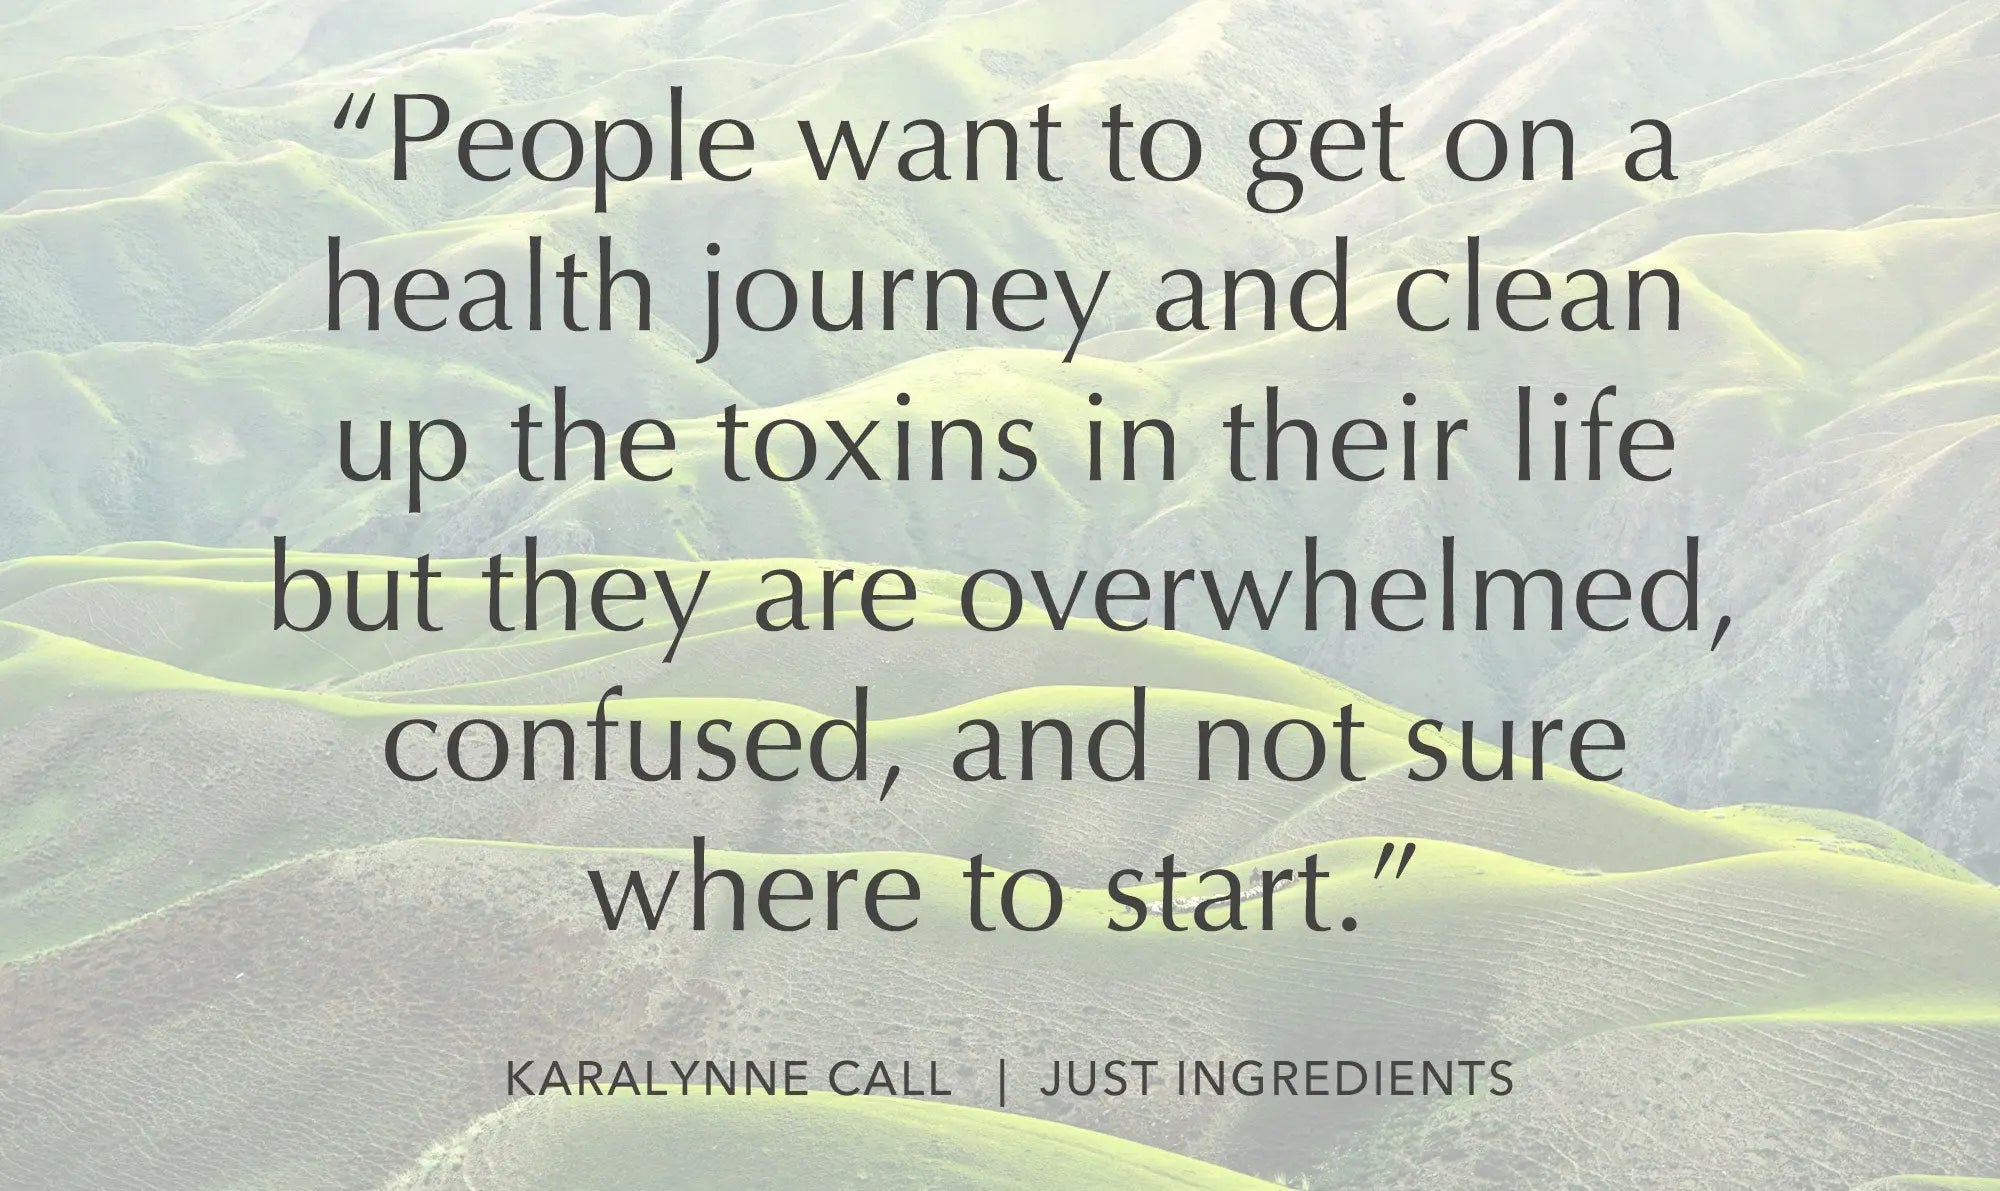 How to reduce toxins and feel healthier in your home with Karalynne of Just Ingredients